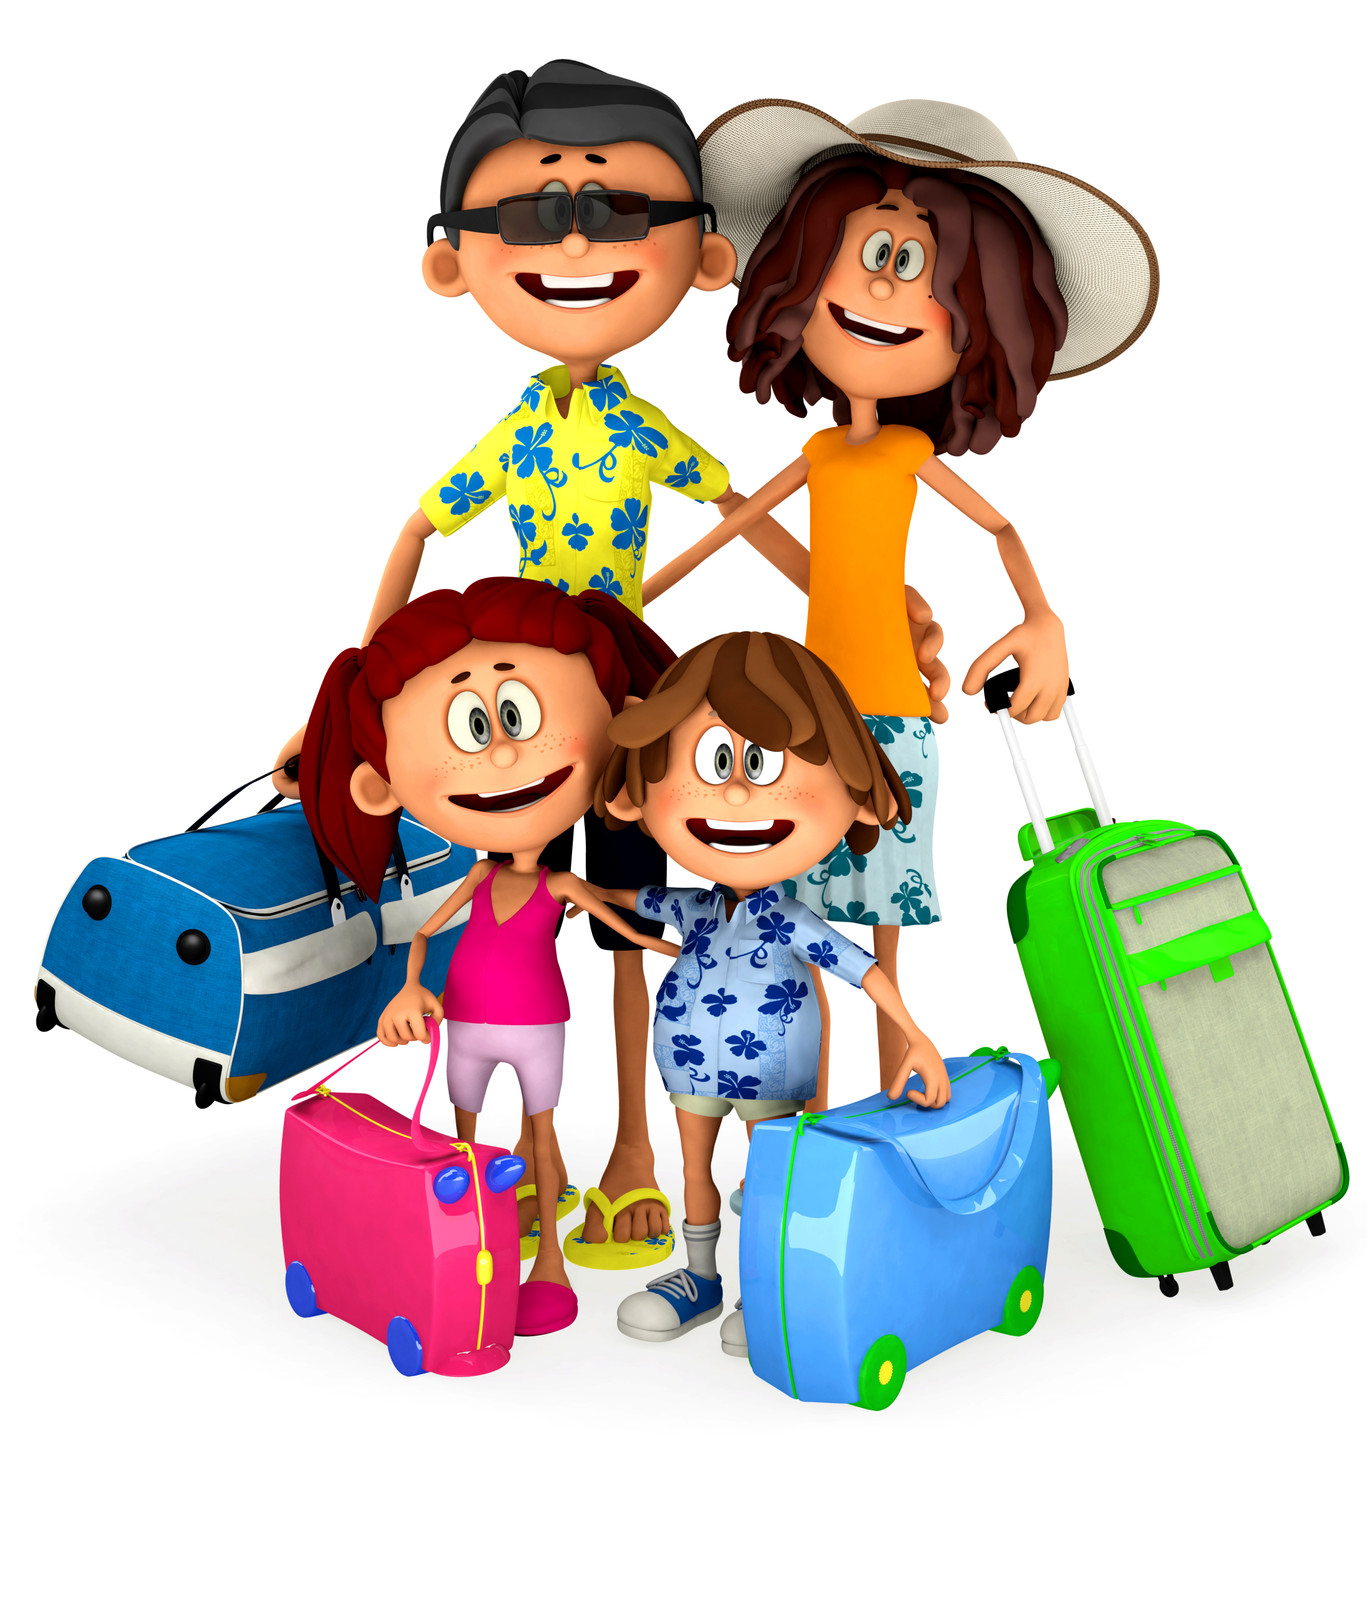 Vacation clip art images illustrations photos